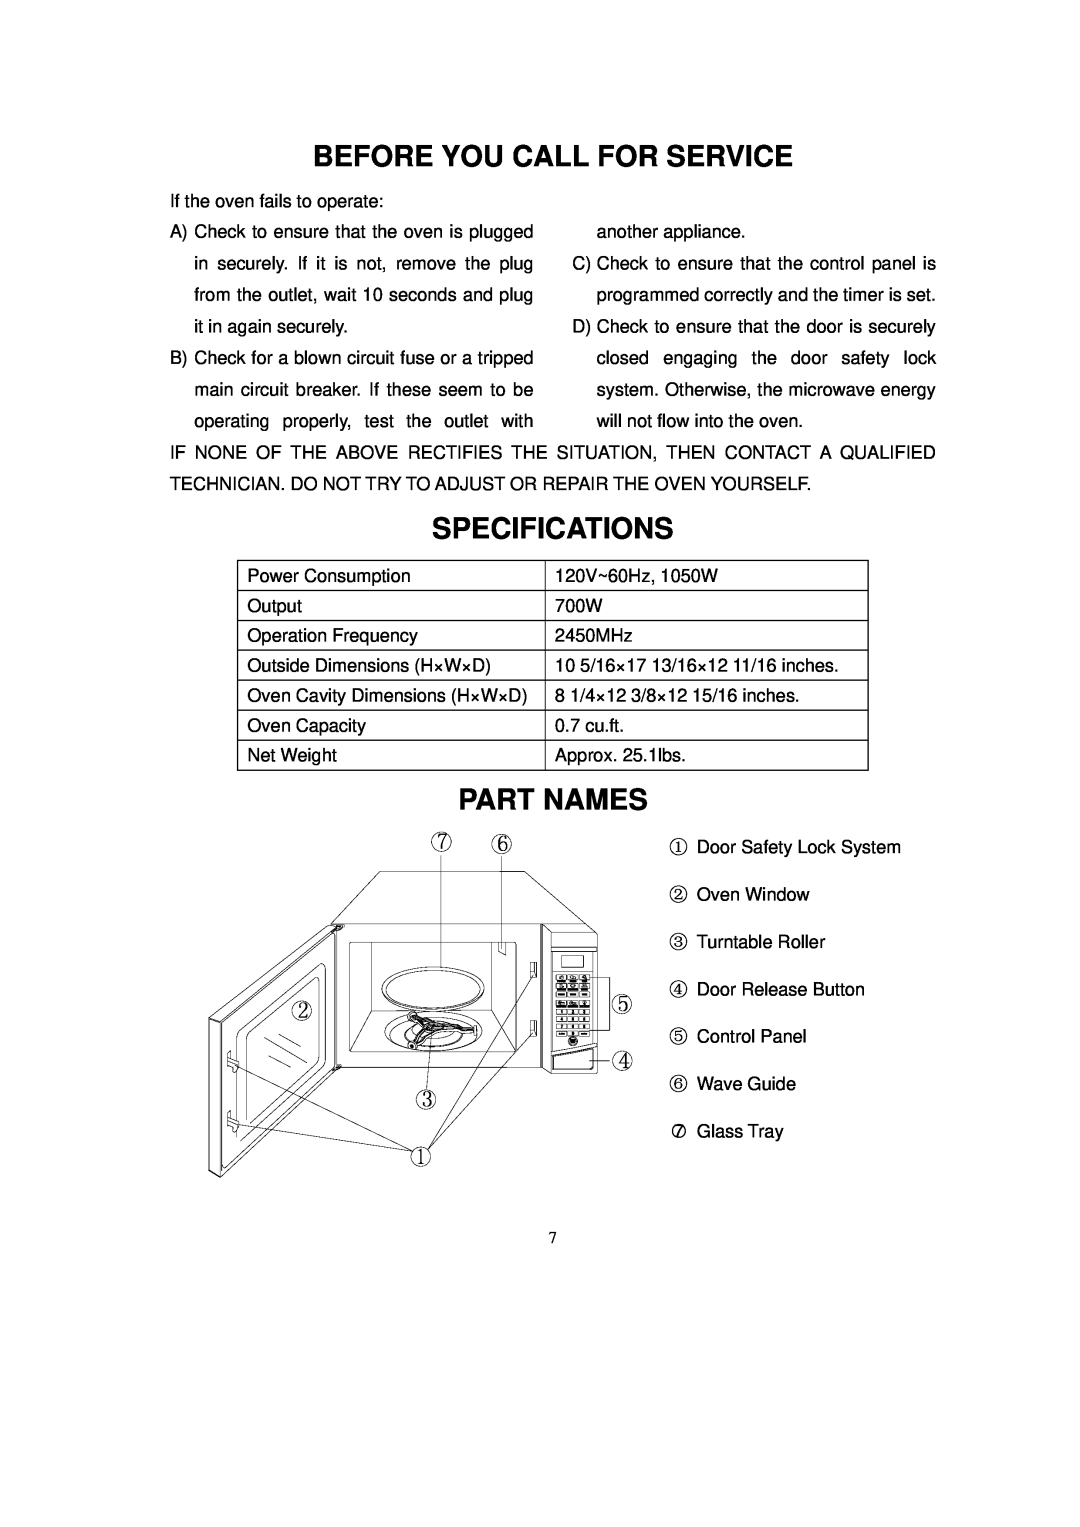 RCA RMW733BLACK owner manual Before You Call For Service, Specifications, Part Names 